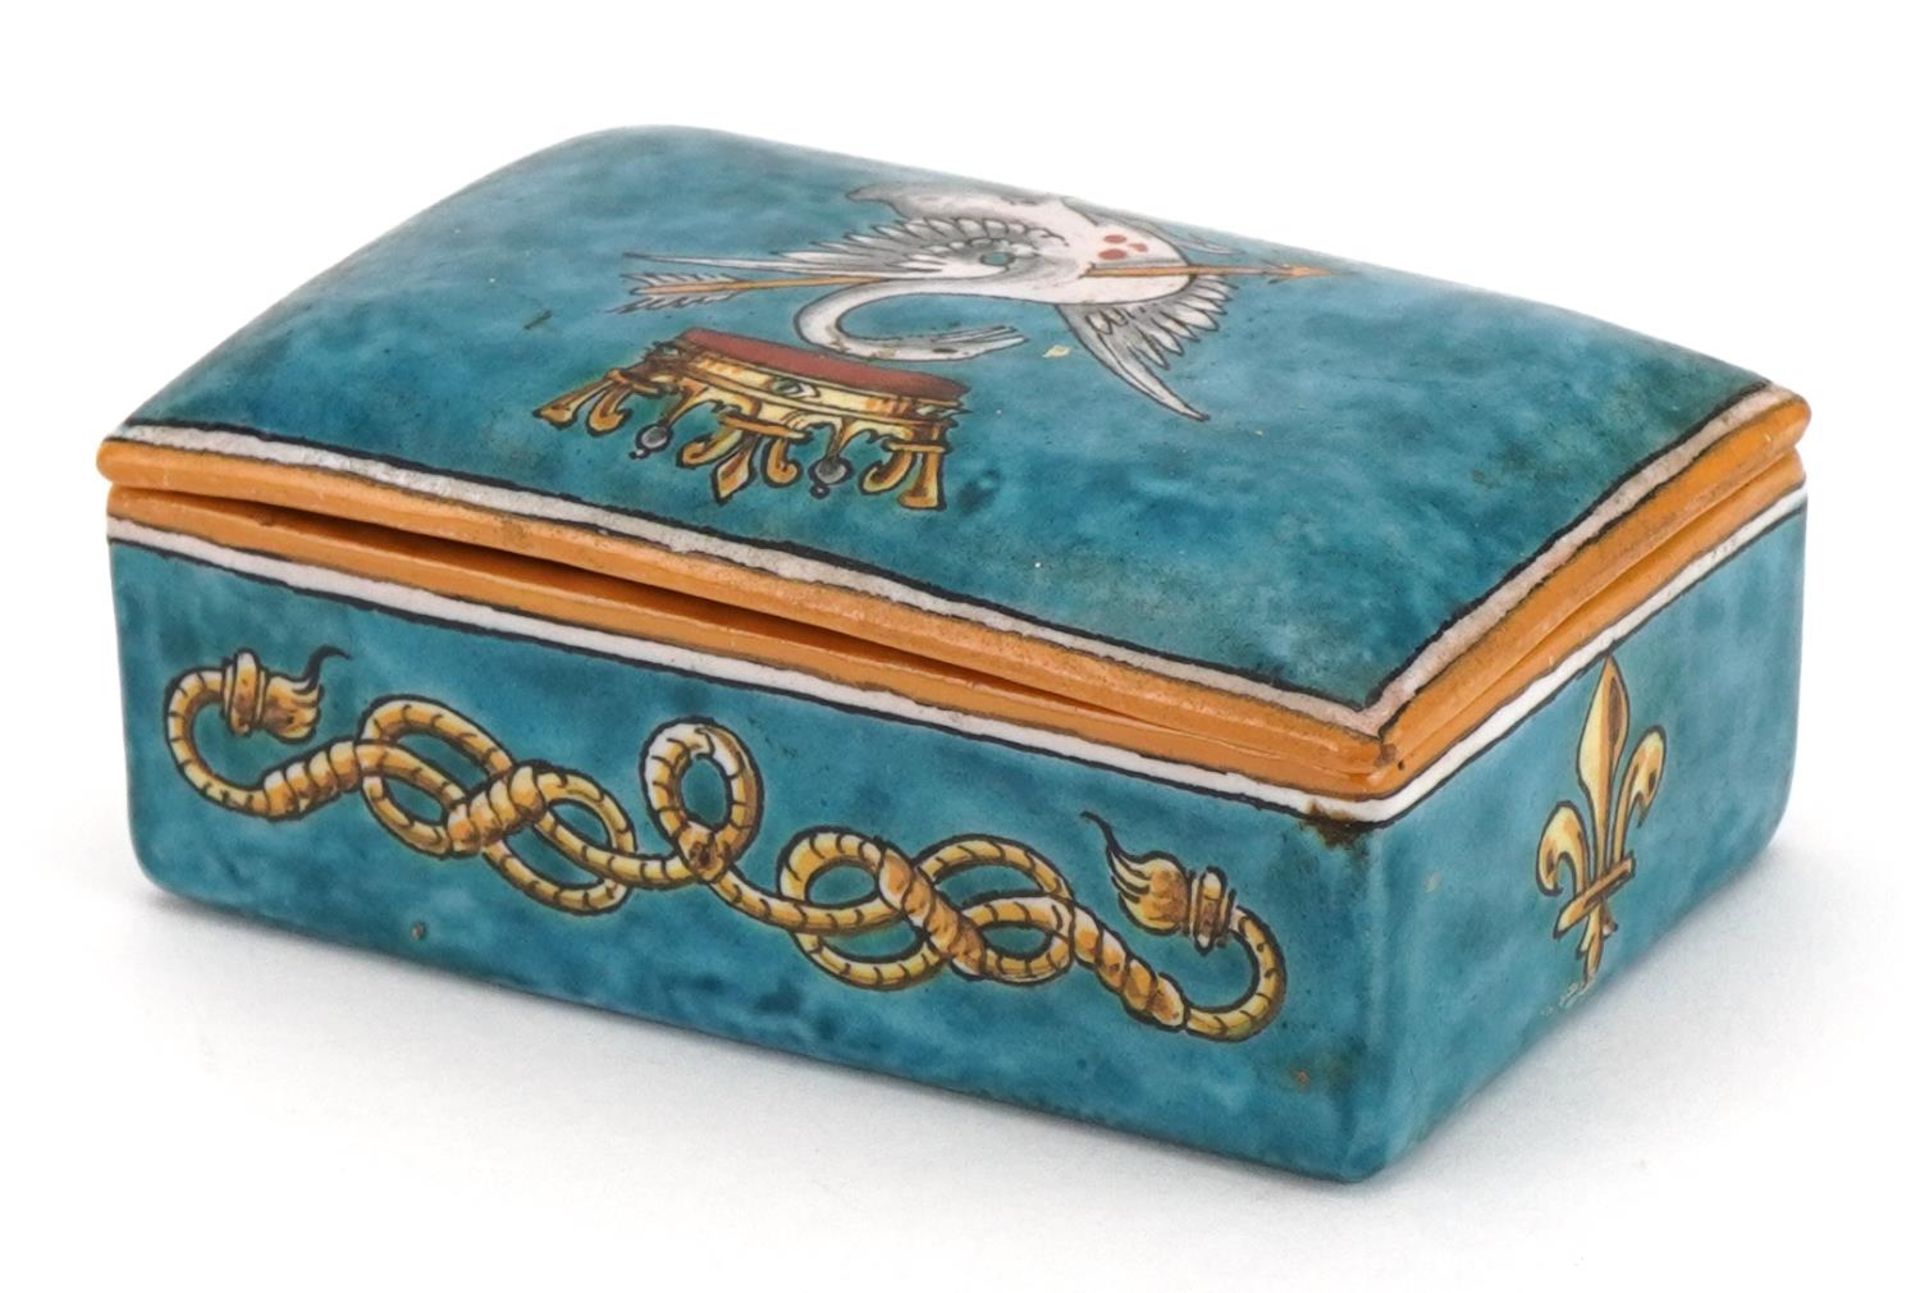 Ulysse Blois, 19th century French faience glazed pottery box and cover hand painted with fleur de - Image 5 of 8